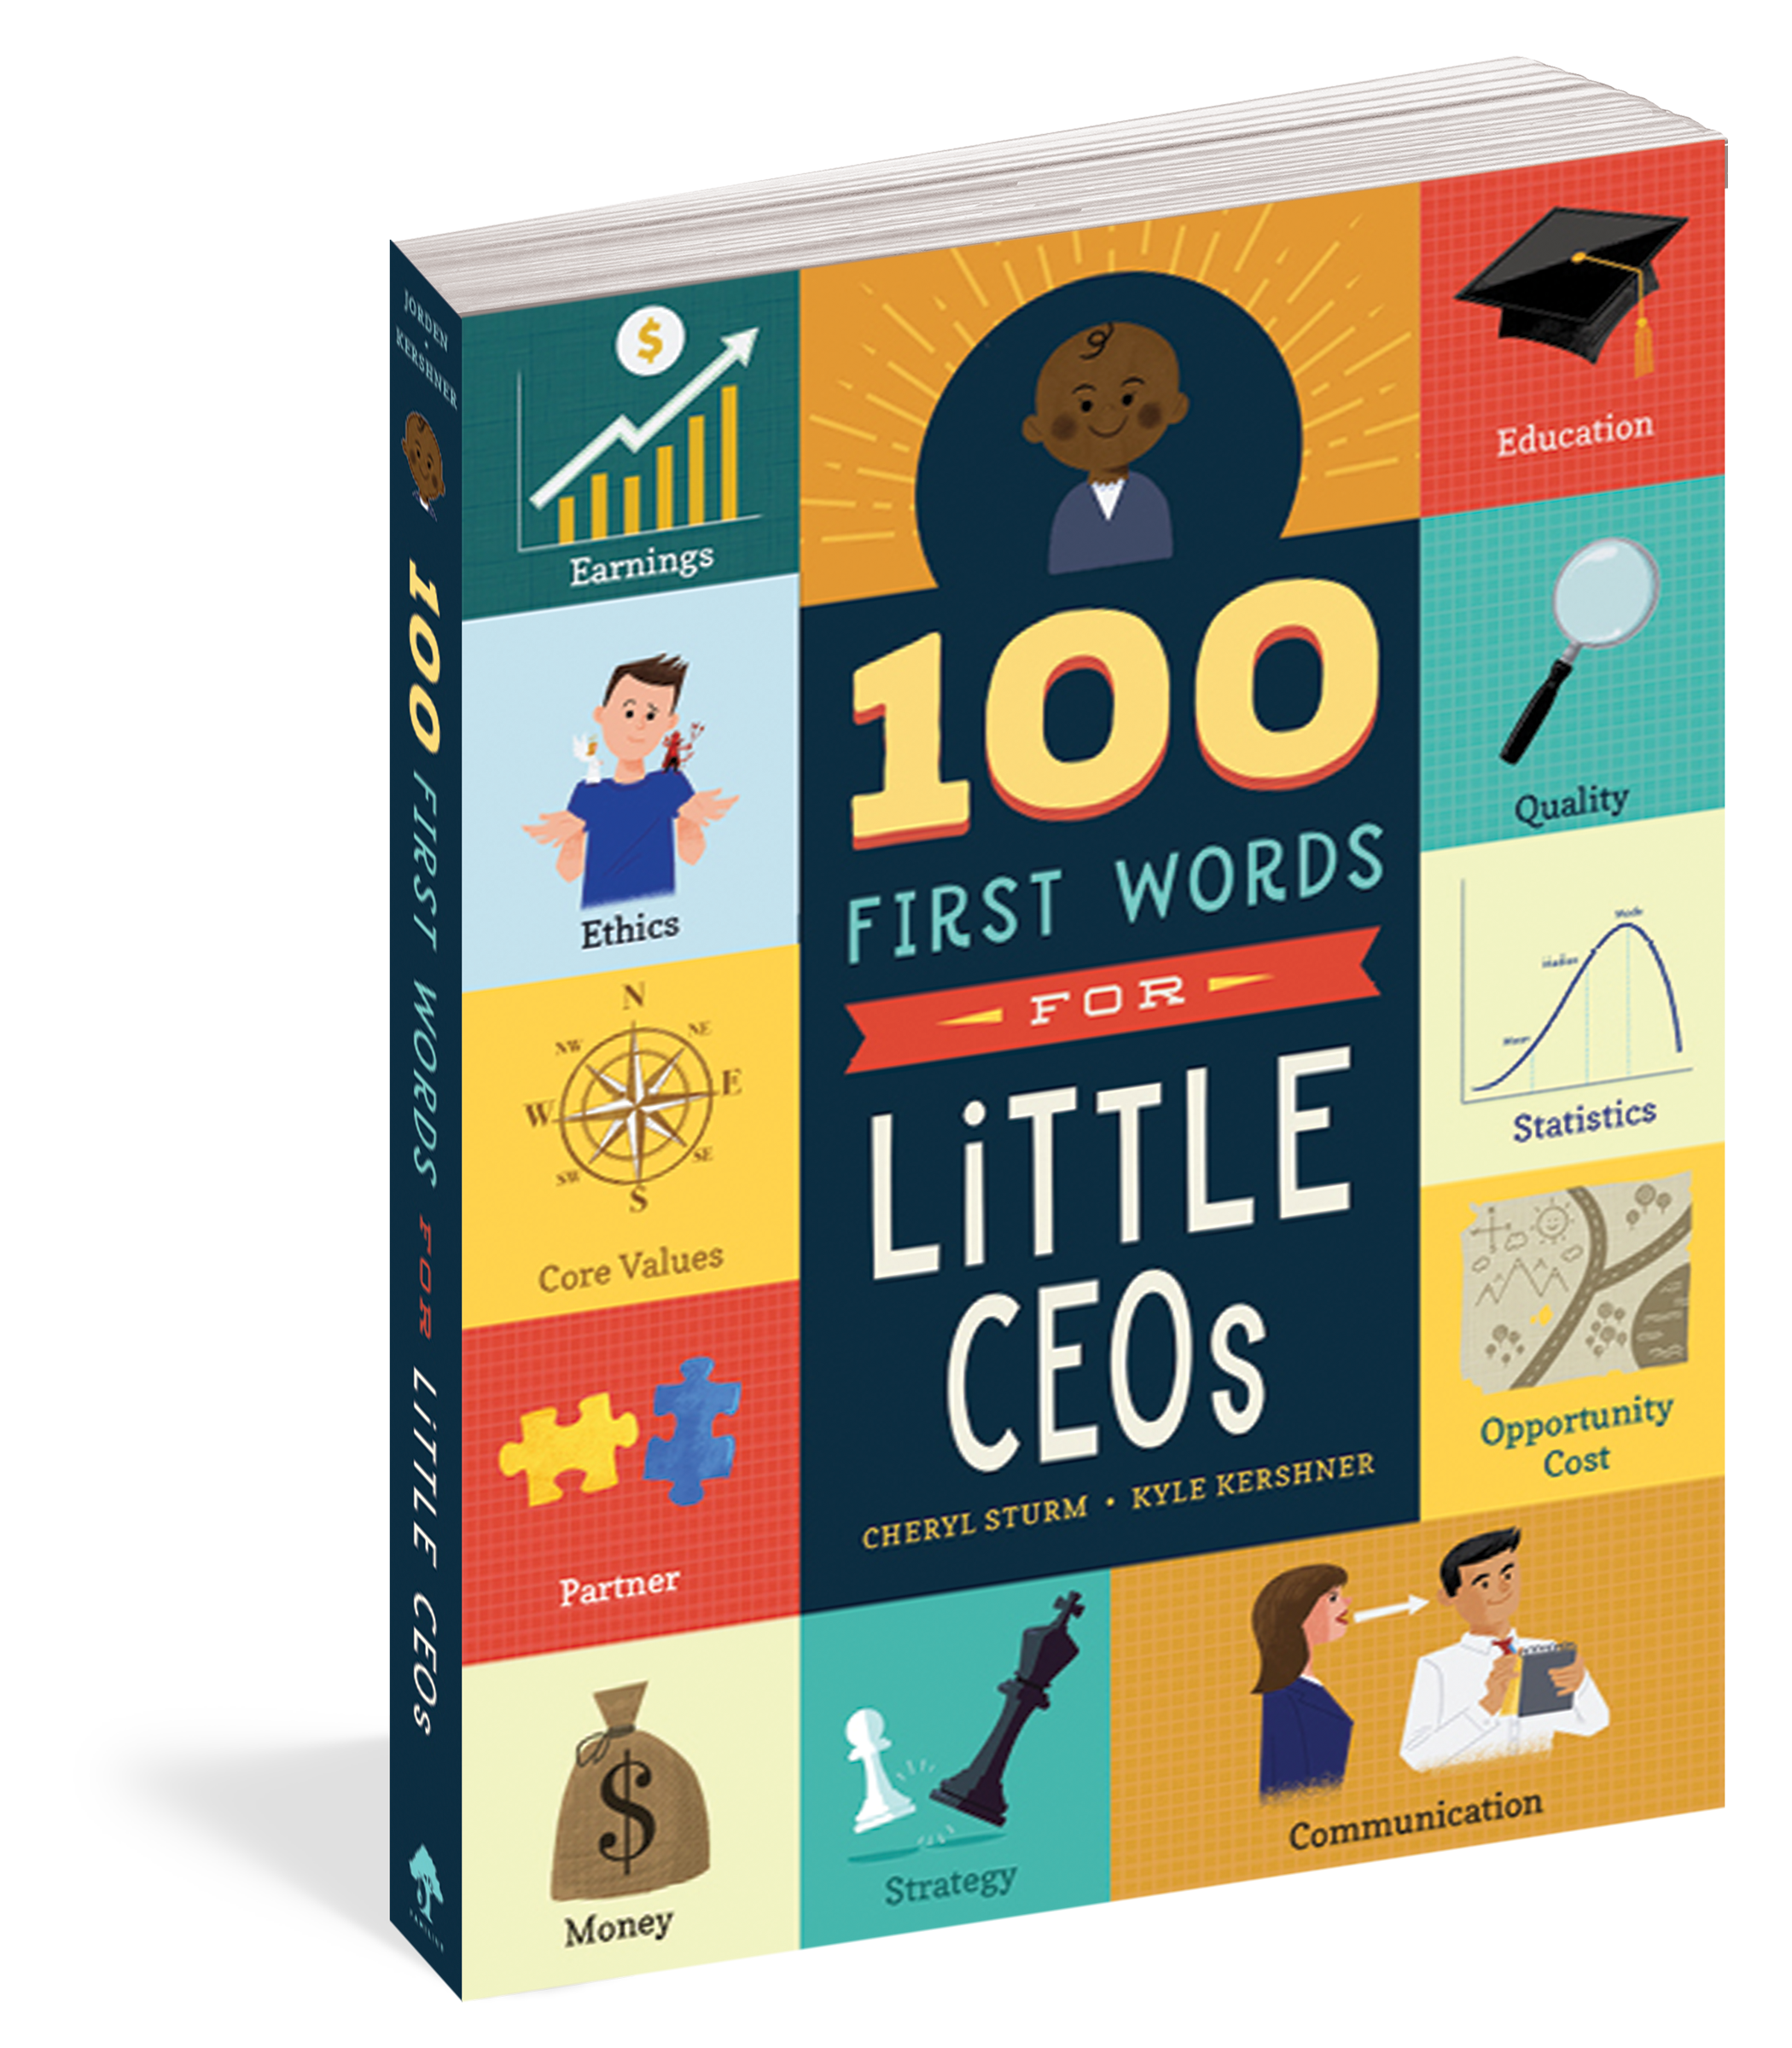 The cover of the book 100 First Words for Little CEOs.